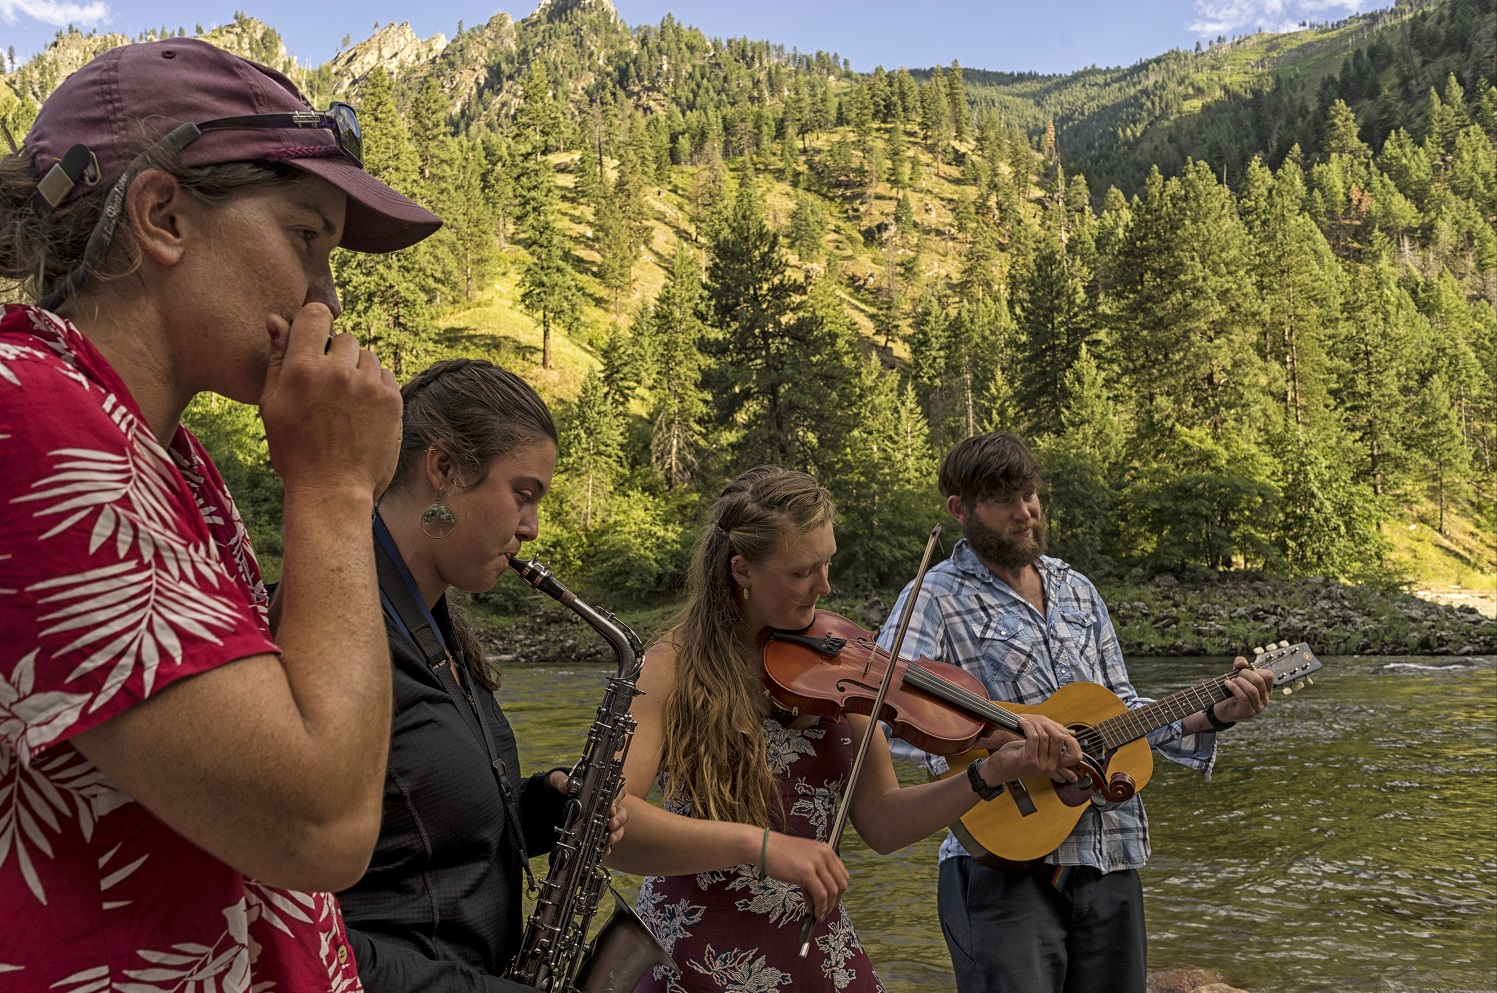 Guide Playlist: Songs for a river trip state of mind